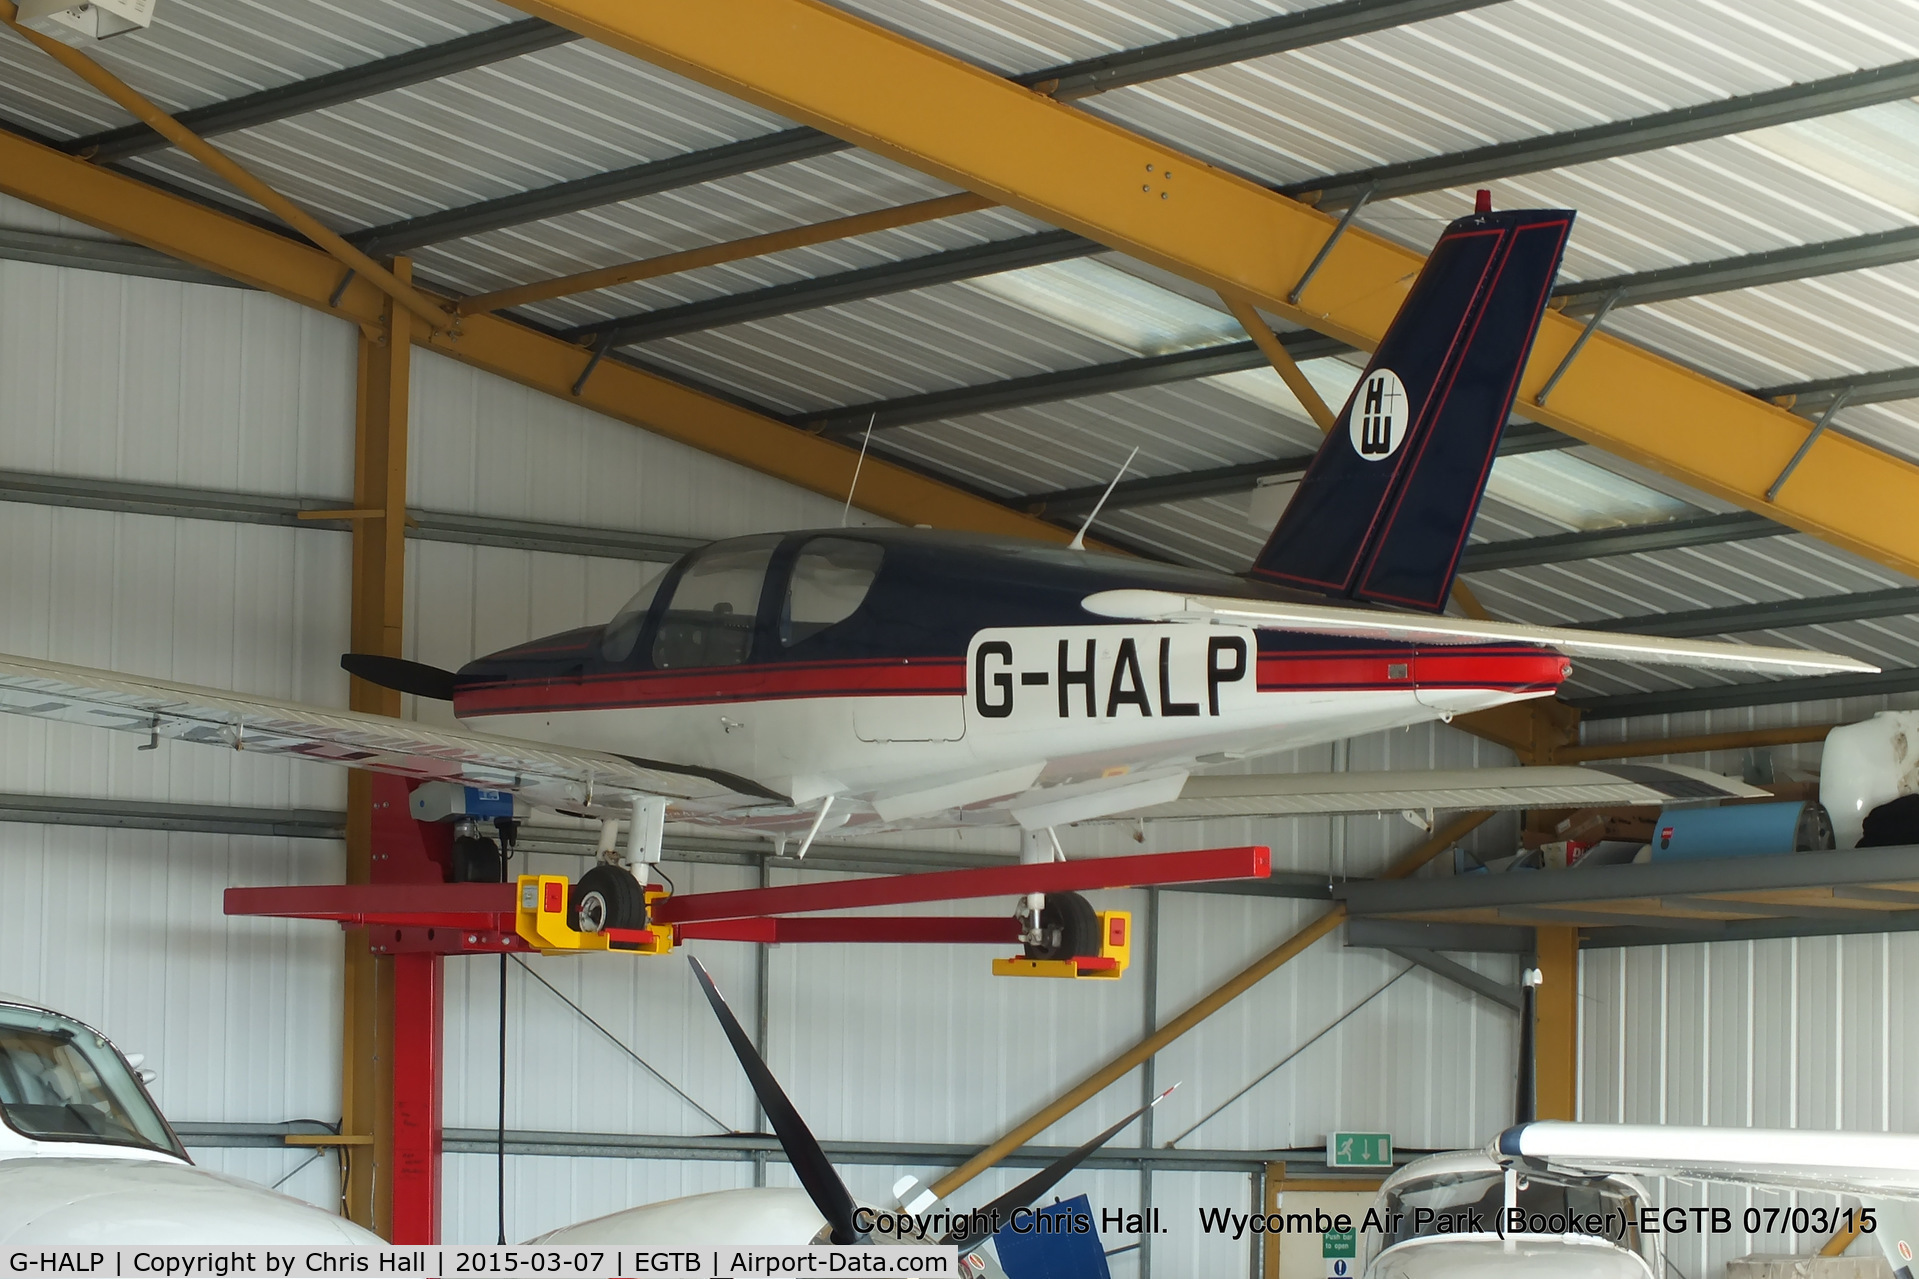 G-HALP, 1981 Socata TB-10 Tobago C/N 192, hangared at Booker, currently De-registered withdrawn from use 21/05/2012